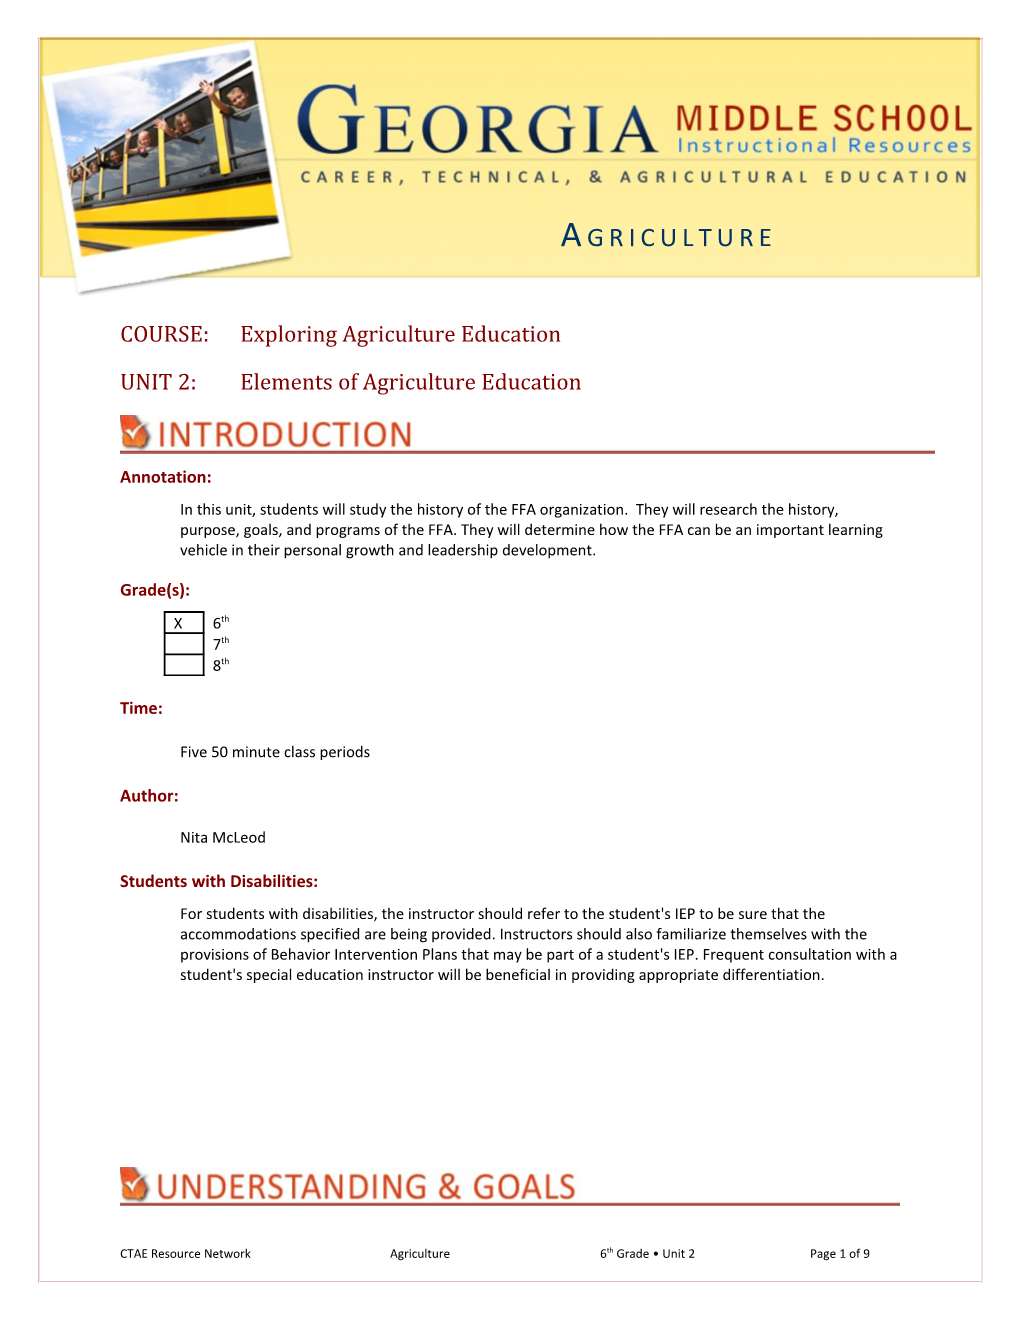 COURSE: Exploring Agriculture Education